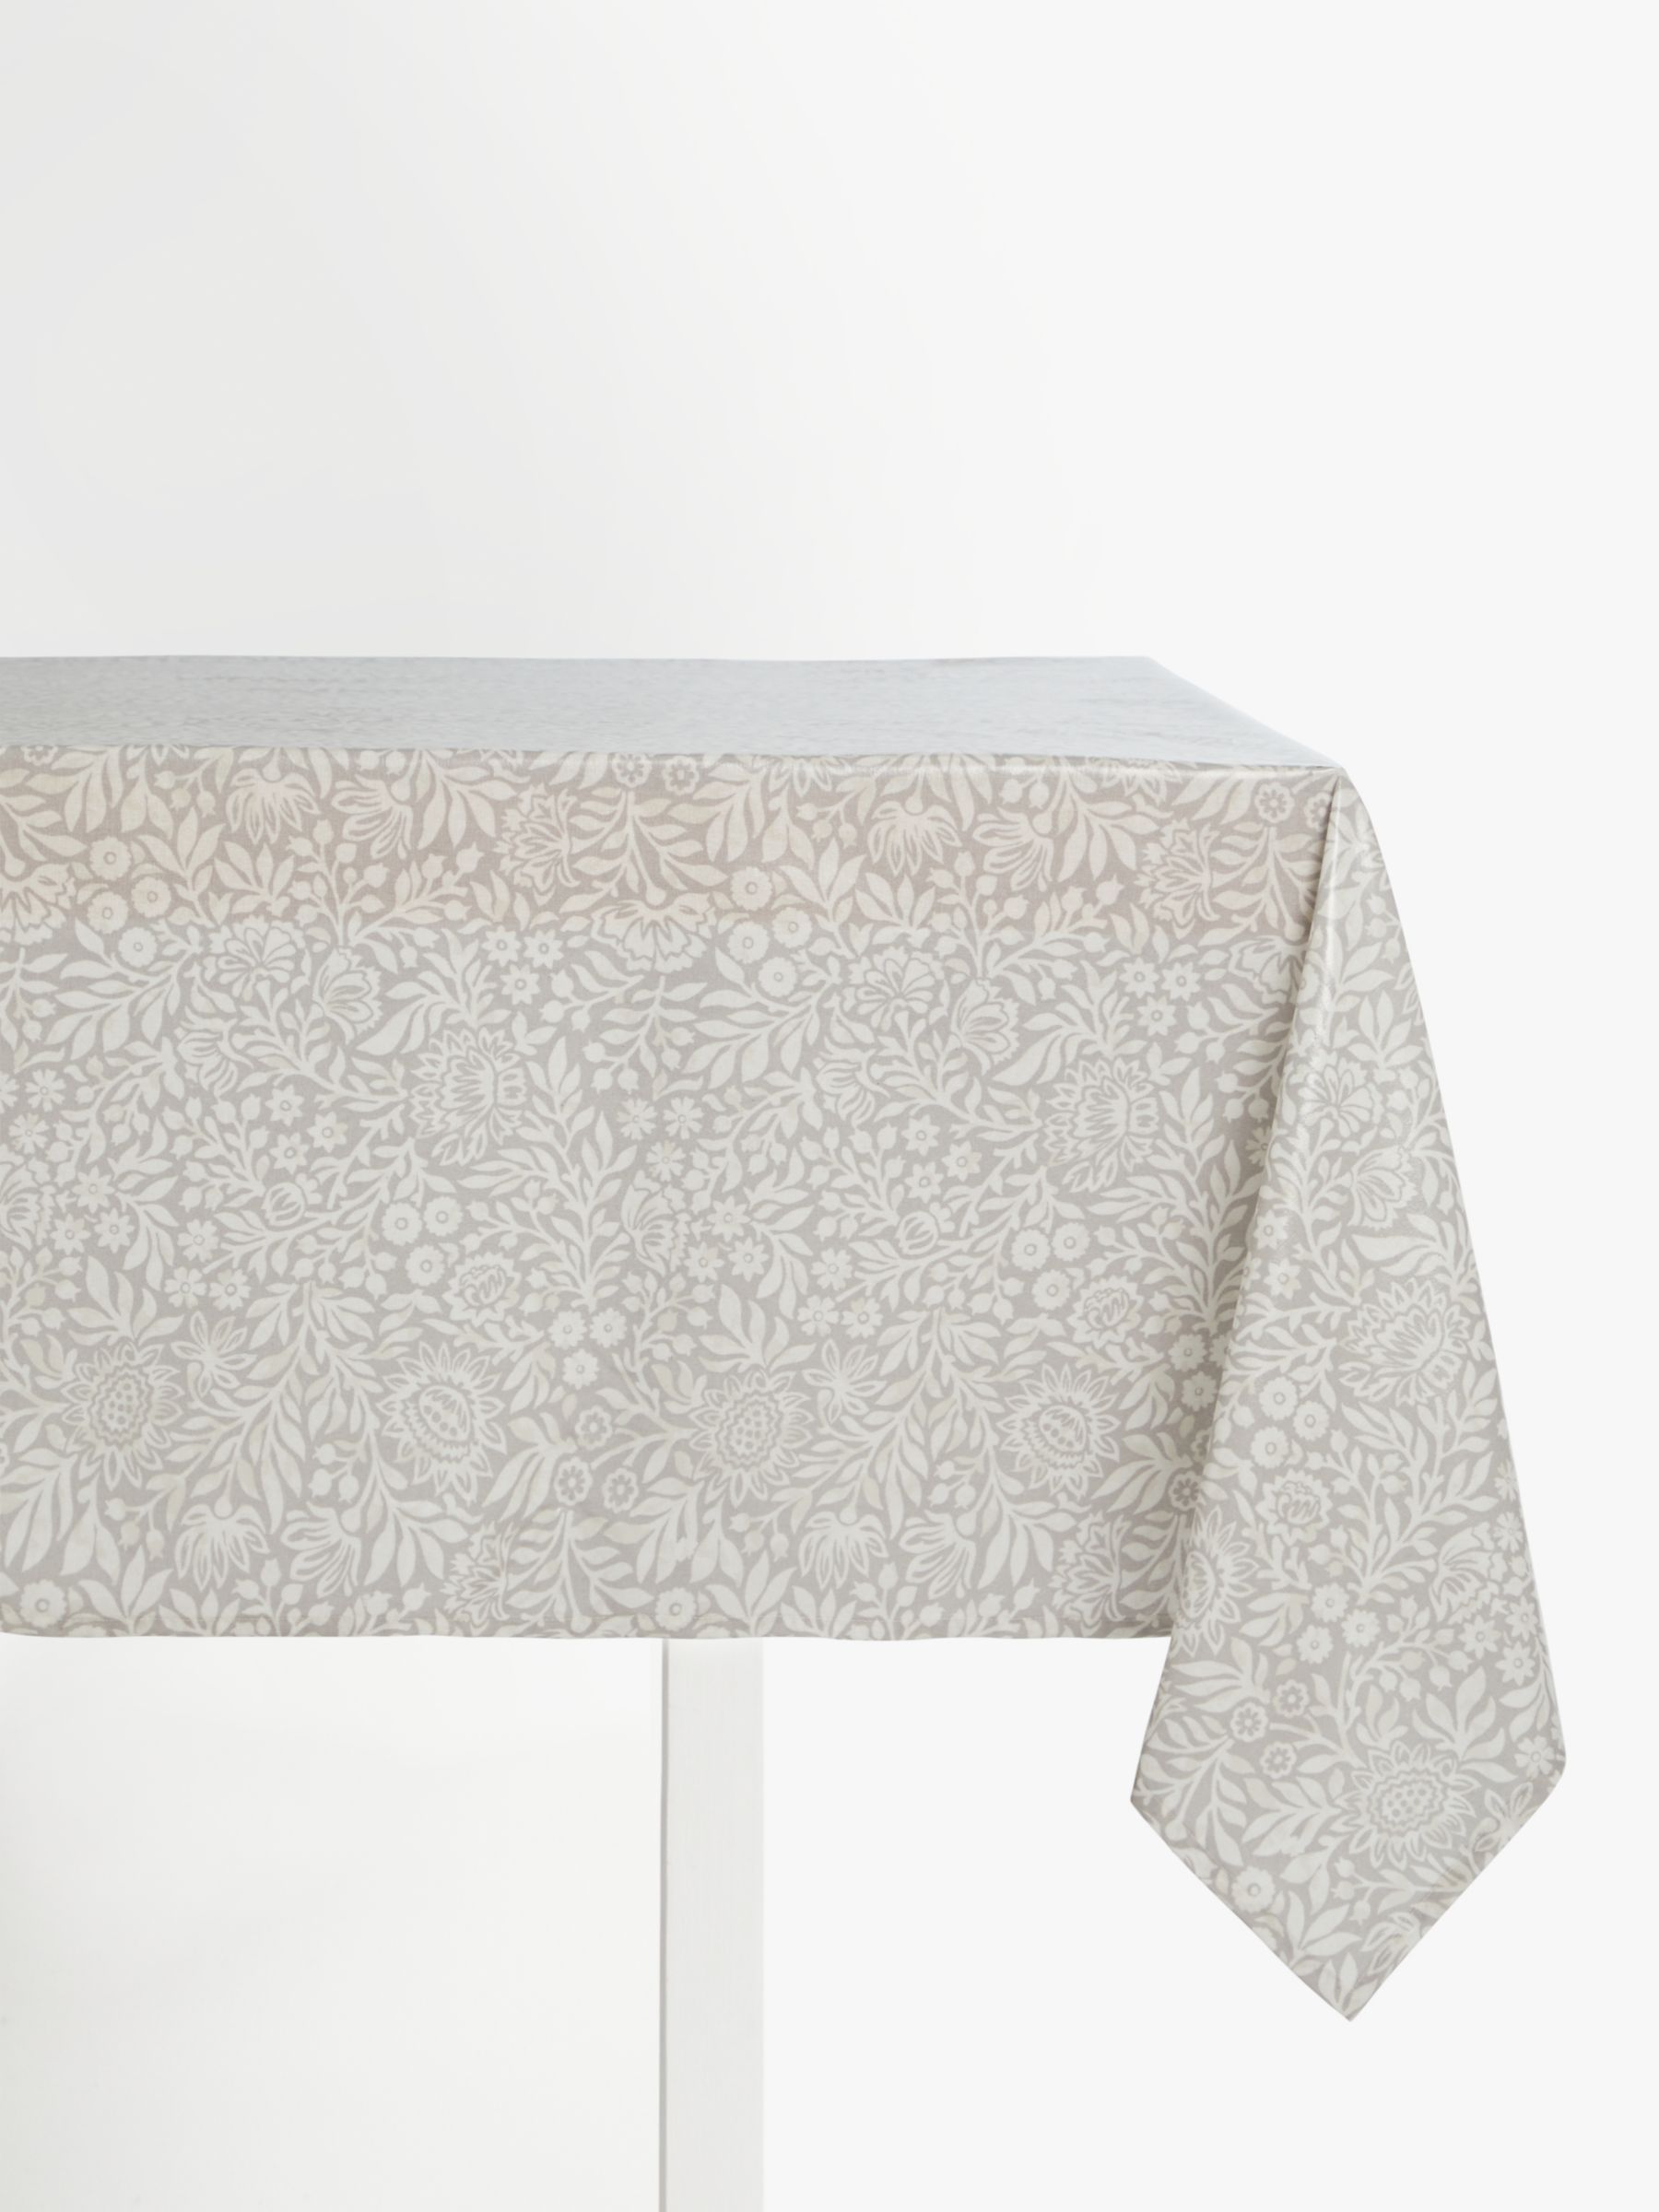 wipe clean tablecloth uk